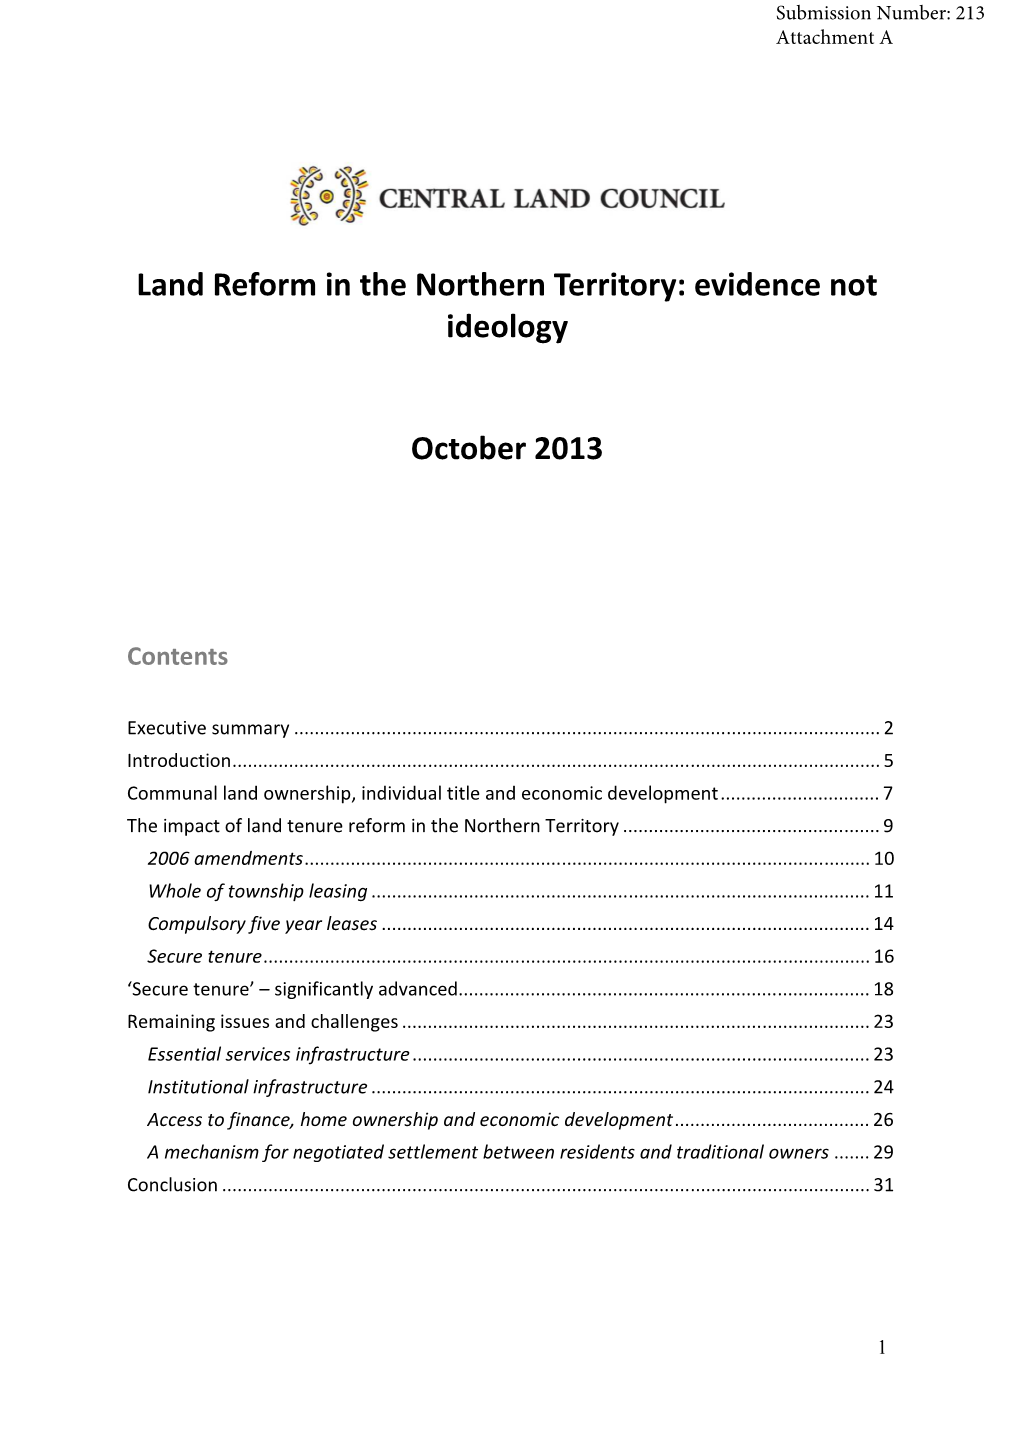 Land Reform in the Northern Territory: Evidence Not Ideology October 2013